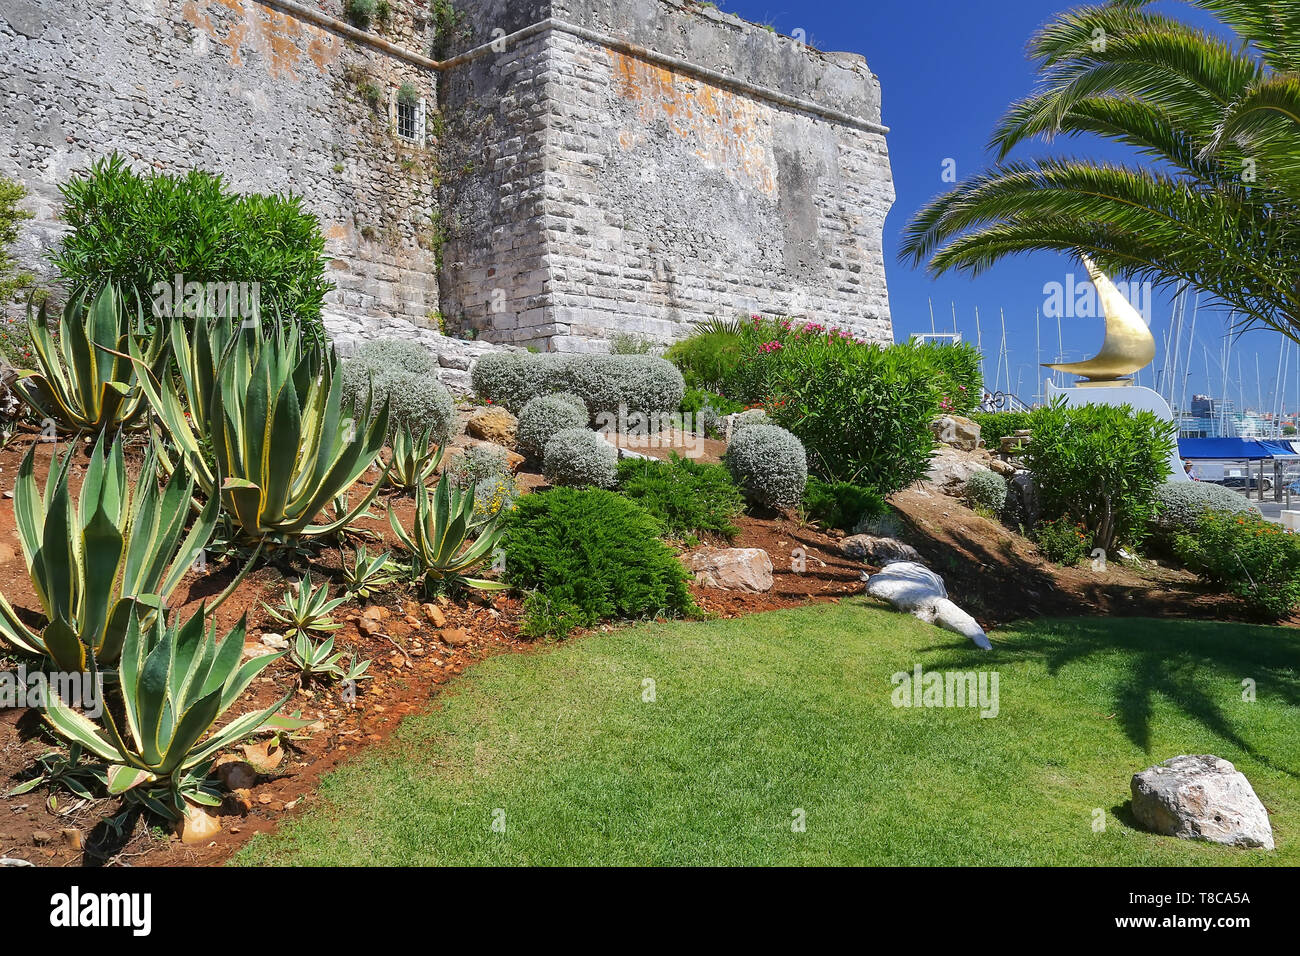 Palm trees and the wall of an ancient fortress. Resort town Cascais. A suburb of Lisbon, Portugal. Stock Photo